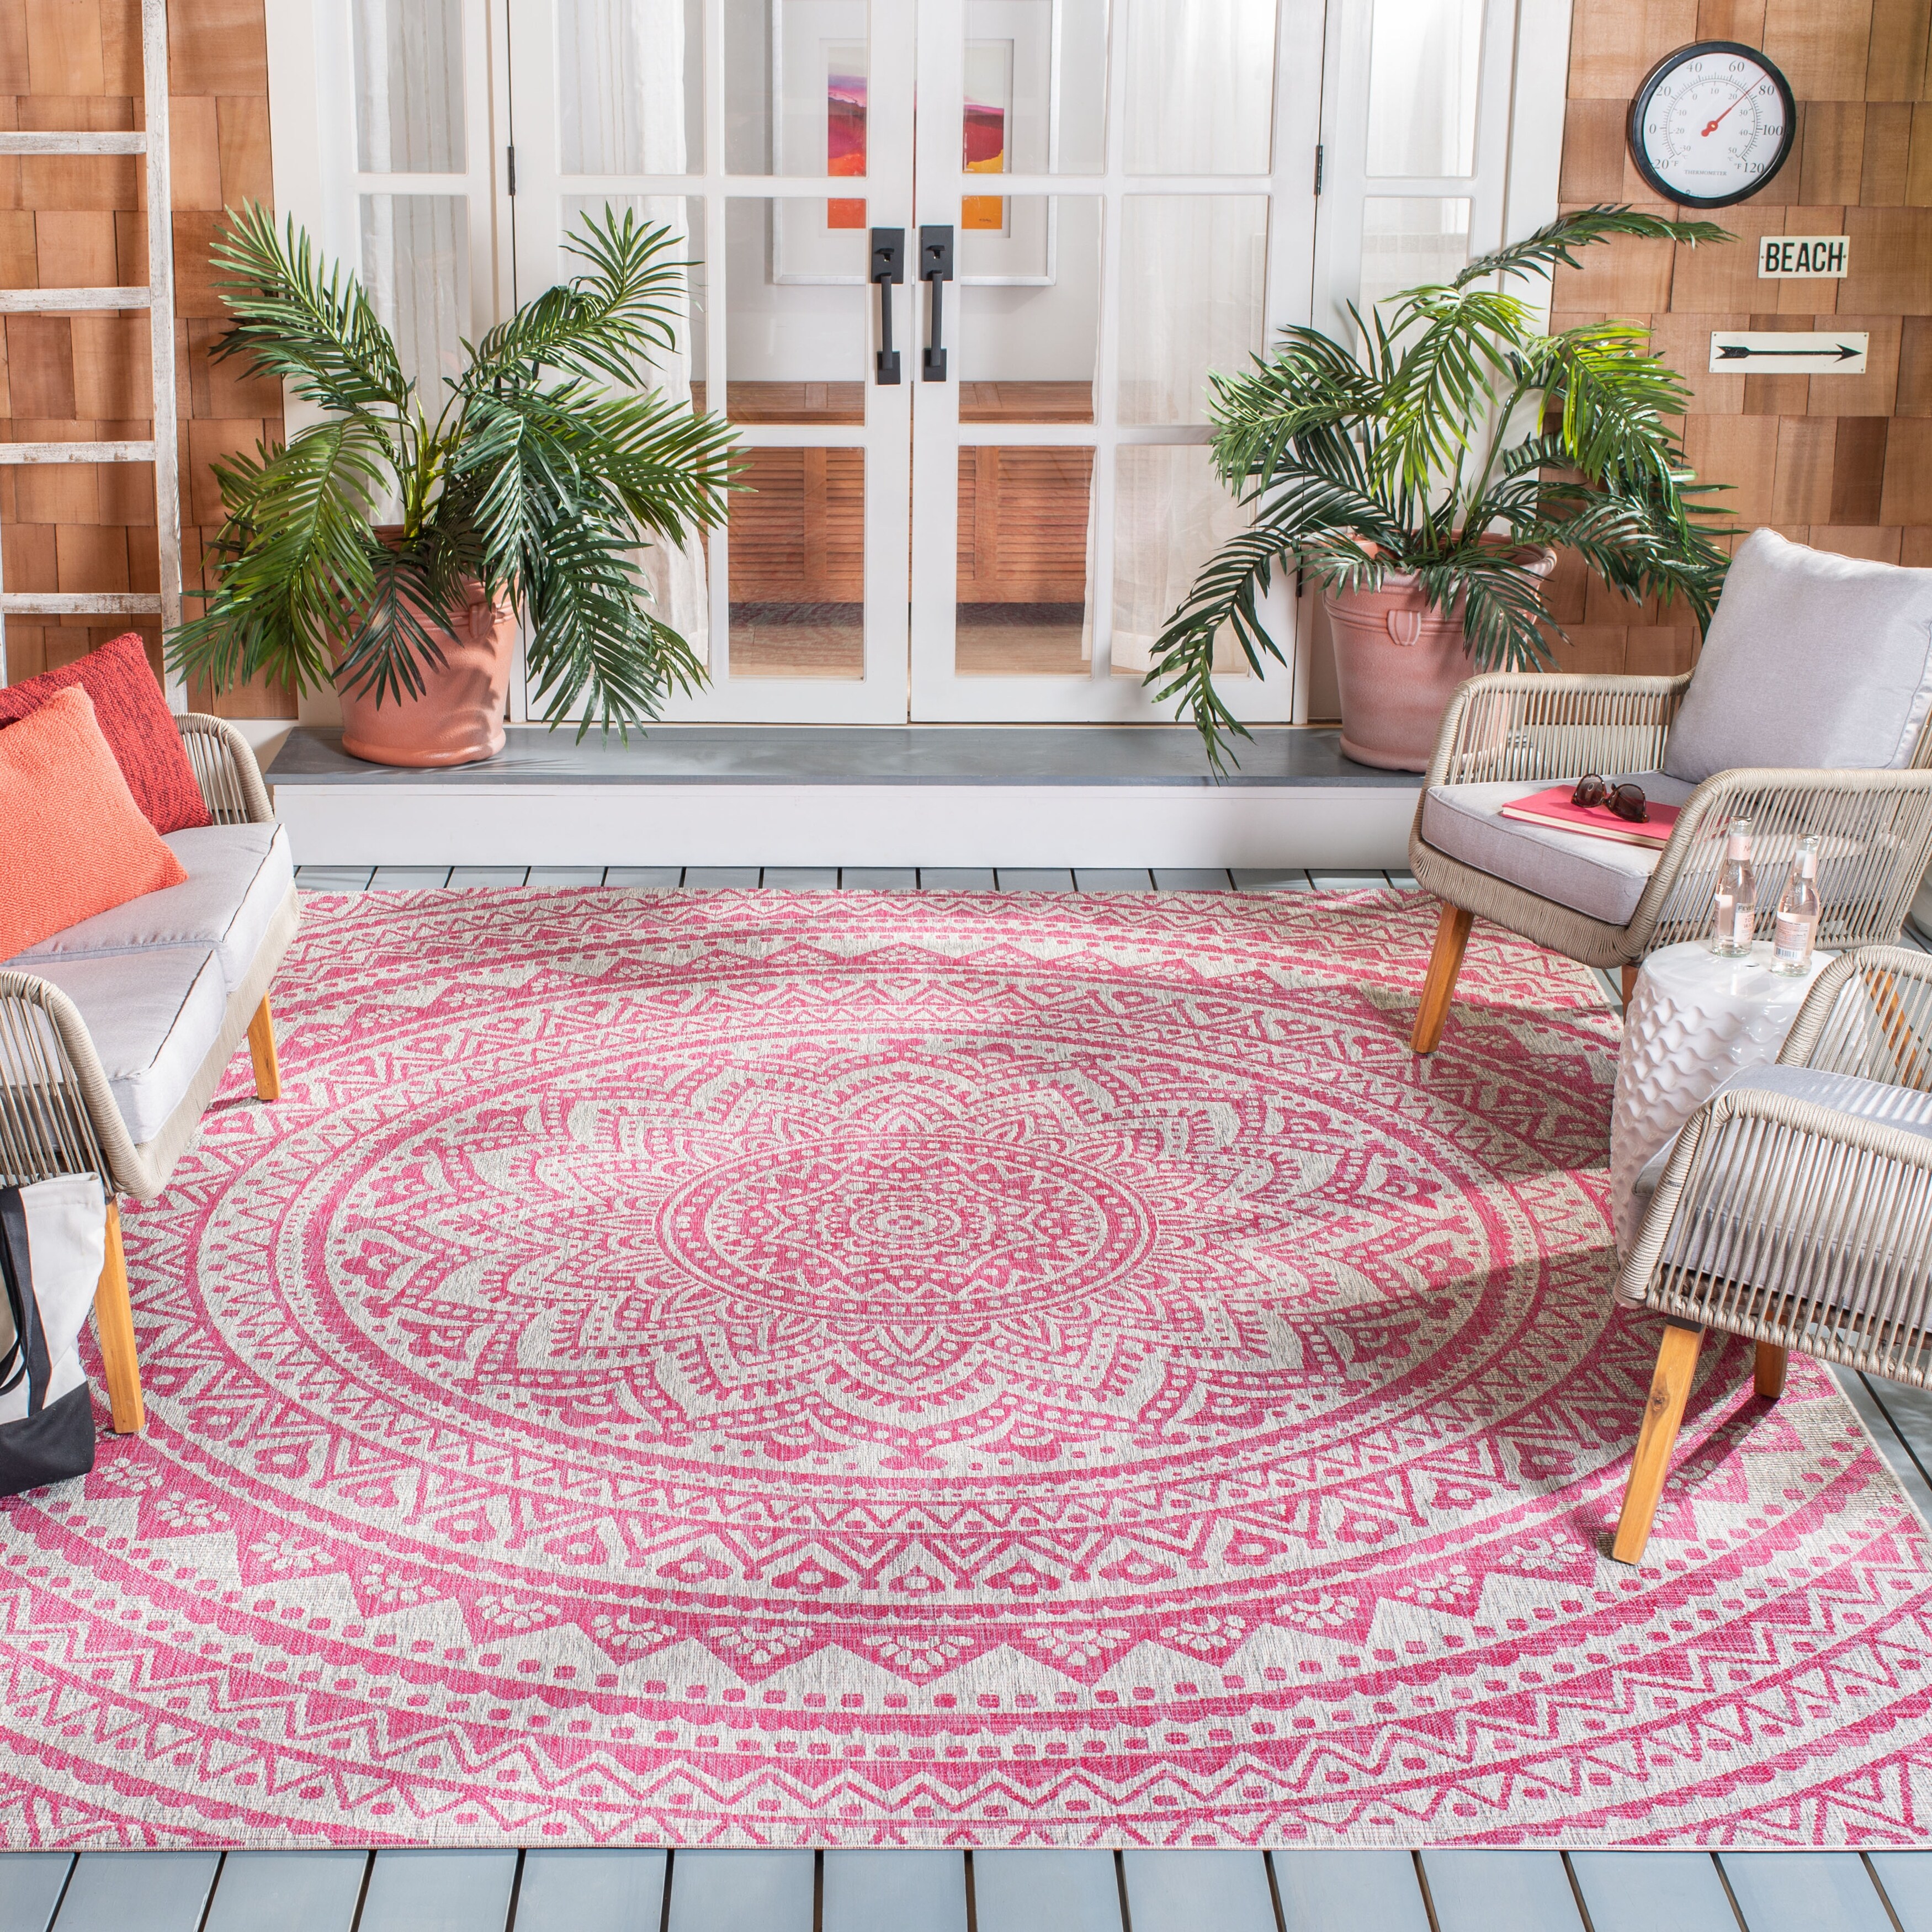 HOMEGNOME Indoor Outdoor Mandala Design Hippie Area Rug | Stain Resistant  and Water Resistant Area Rug for Patio, Balcony, Living Room, Kitchen and